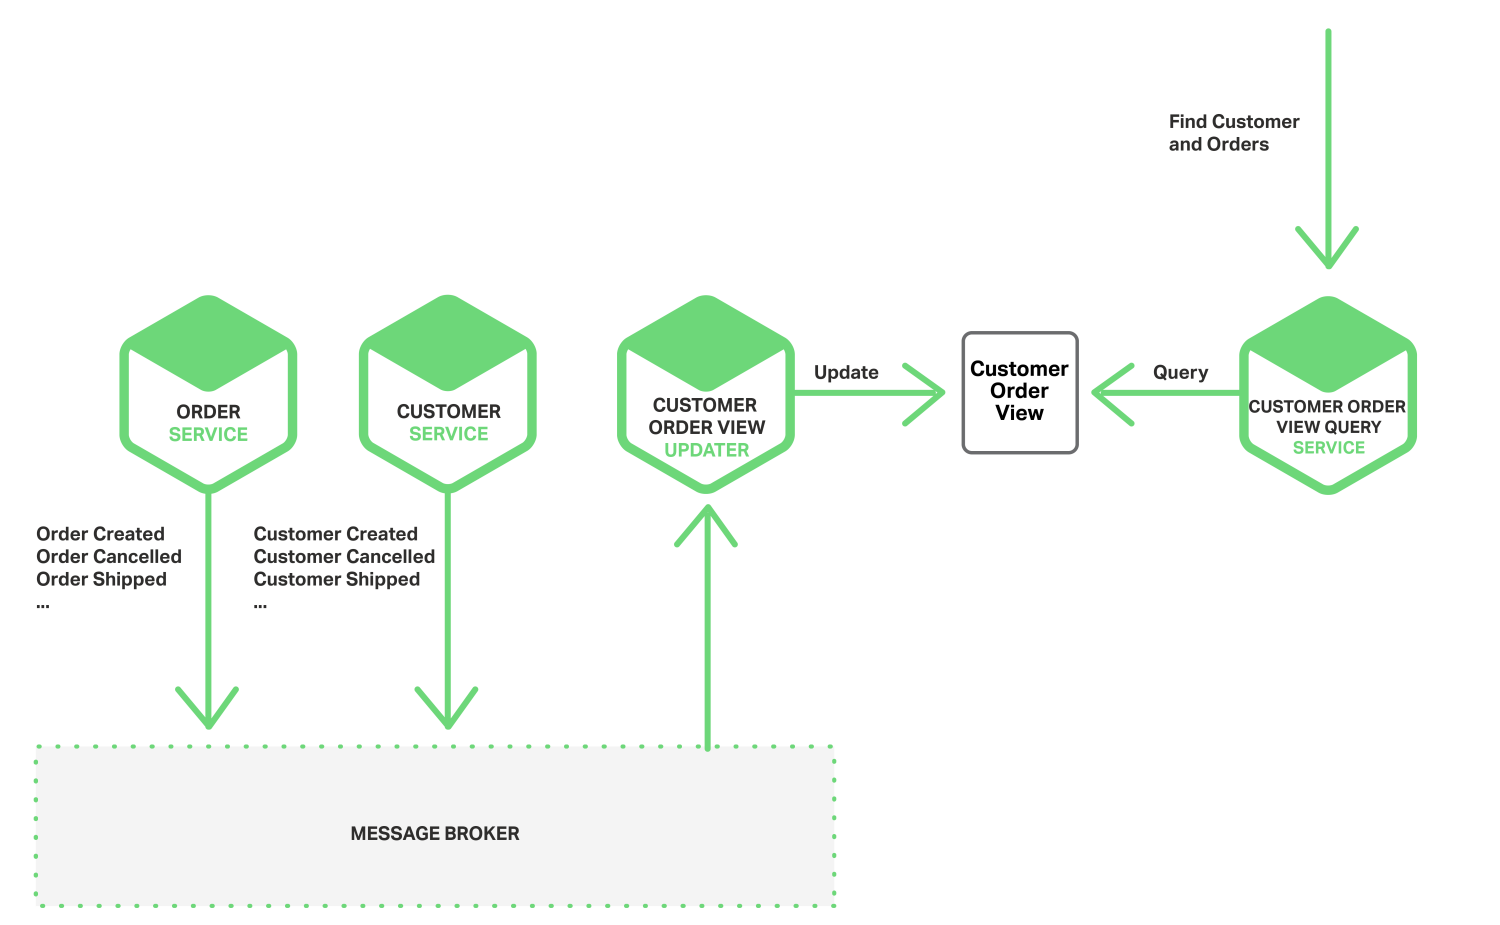 In a microservices architecture, a service can subscribe to event notifications published by other services as triggers for action